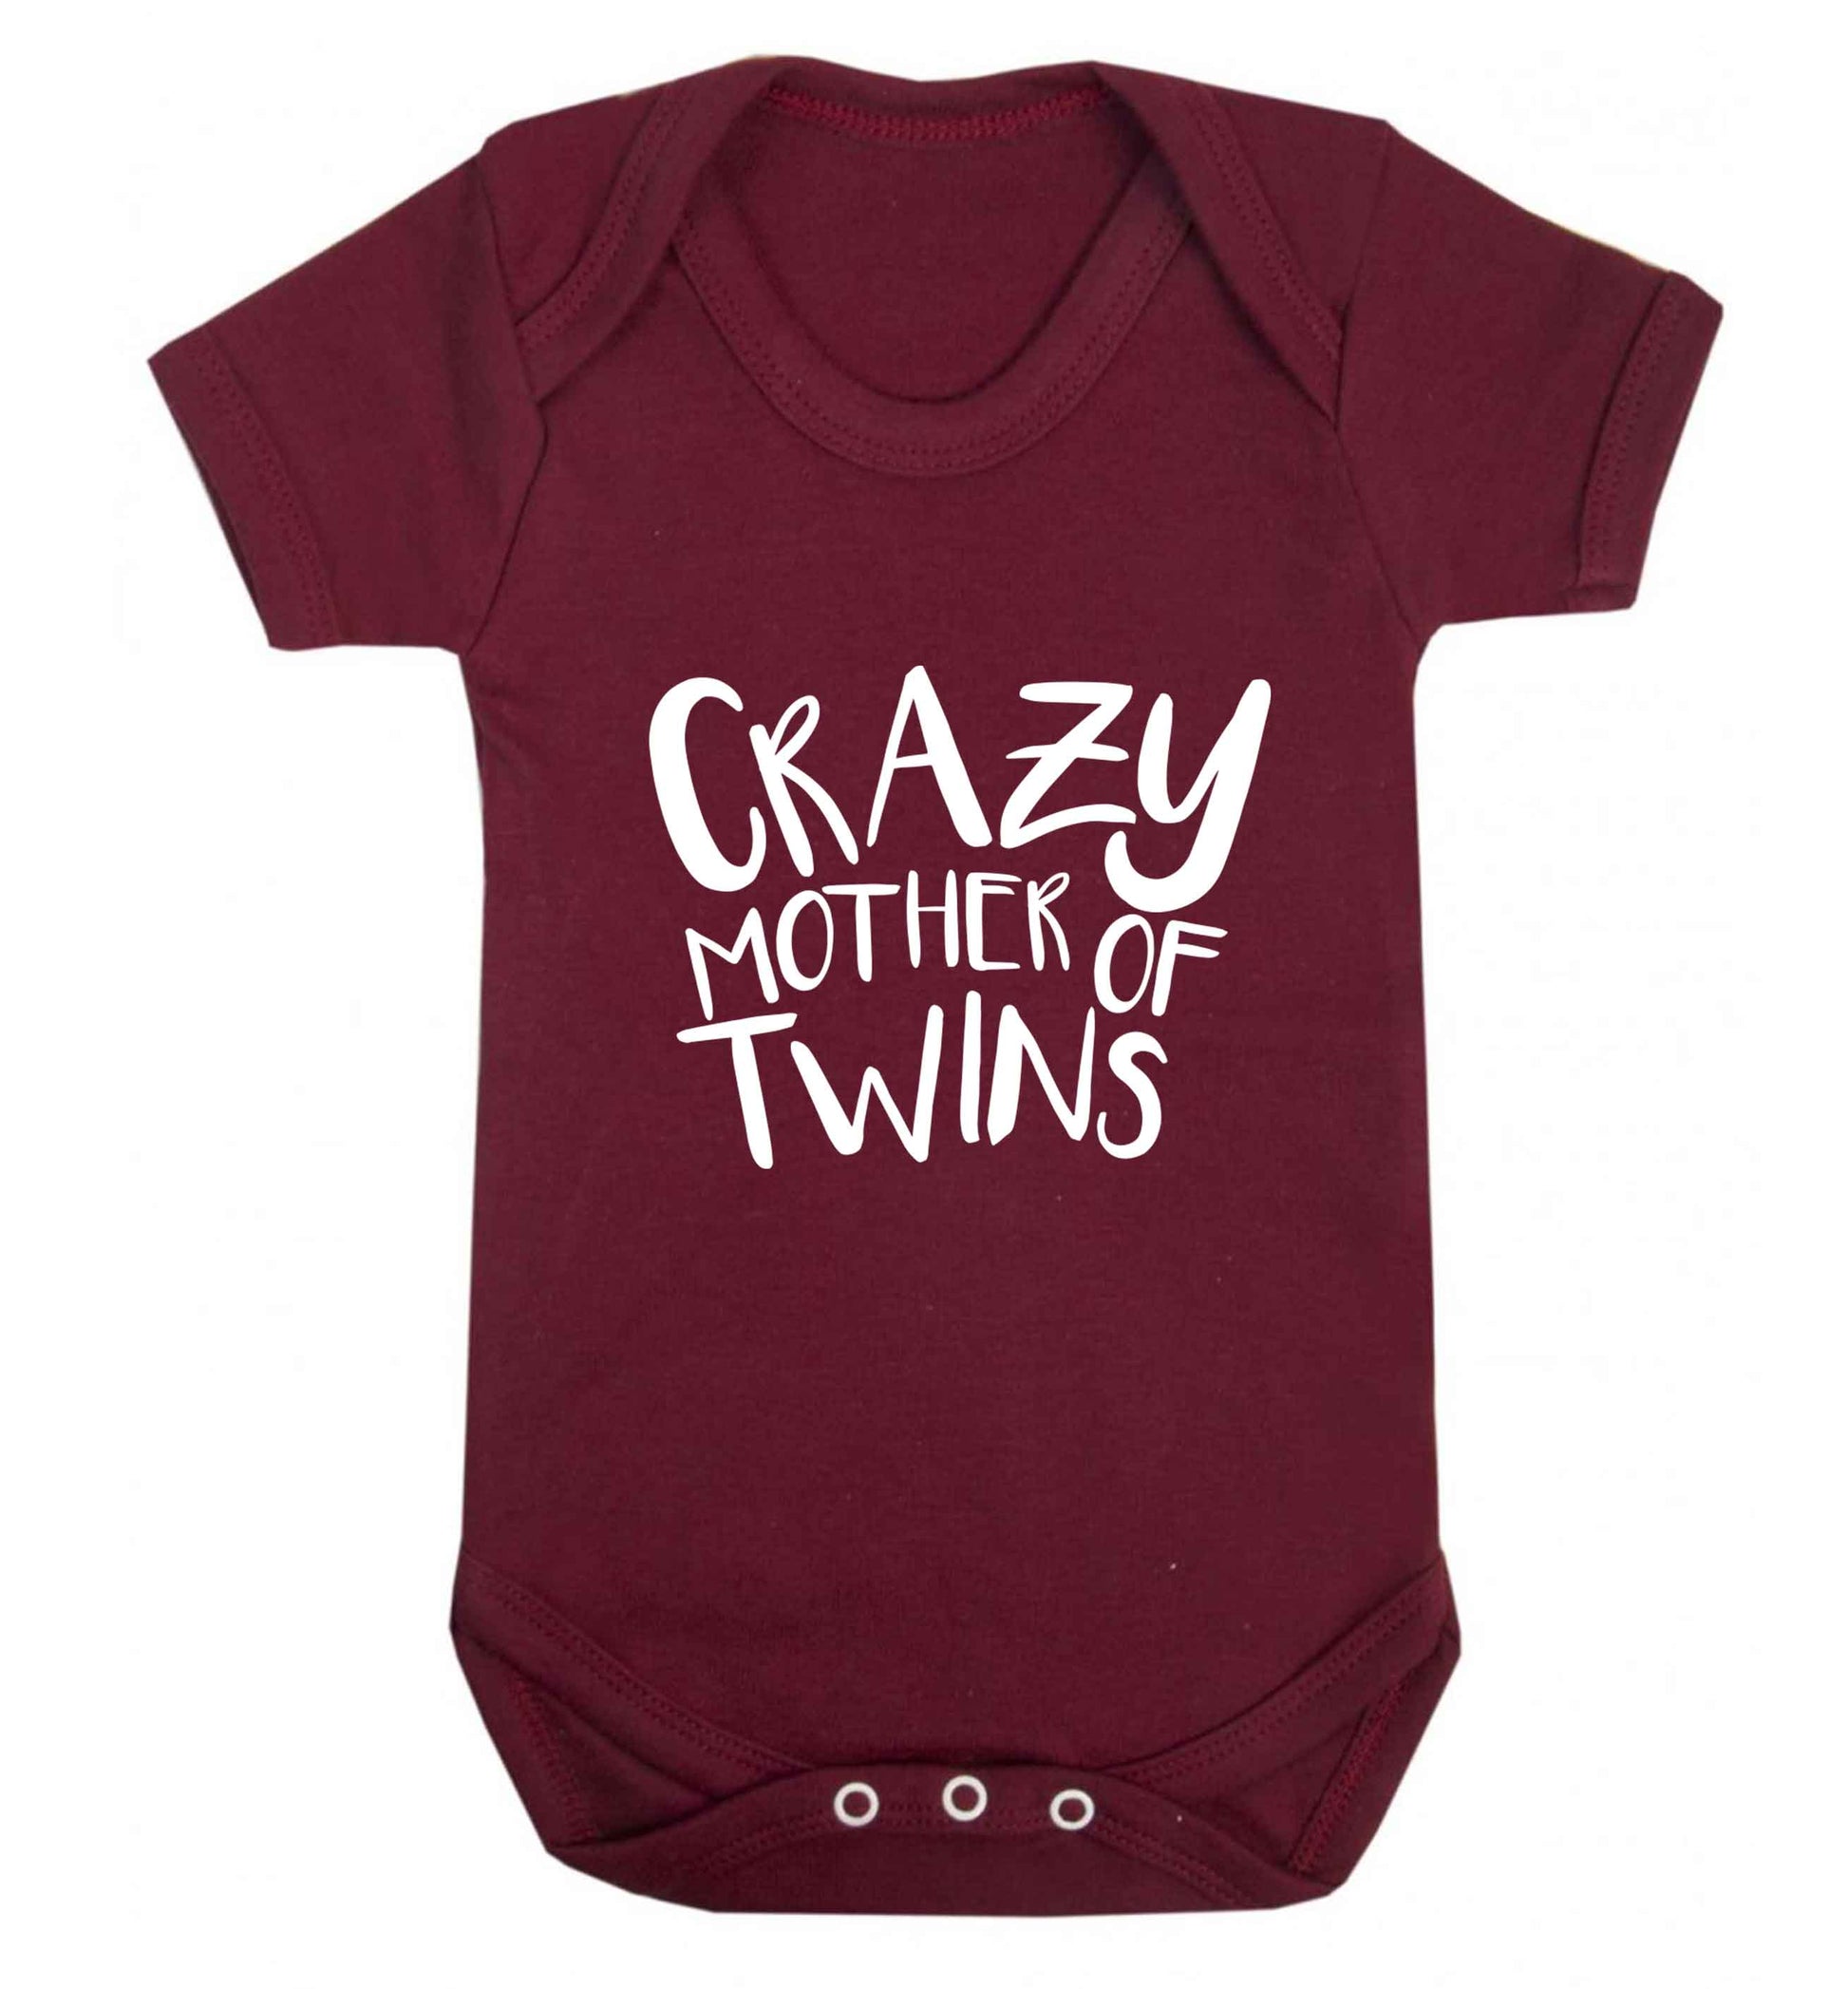 Crazy mother of twins baby vest maroon 18-24 months